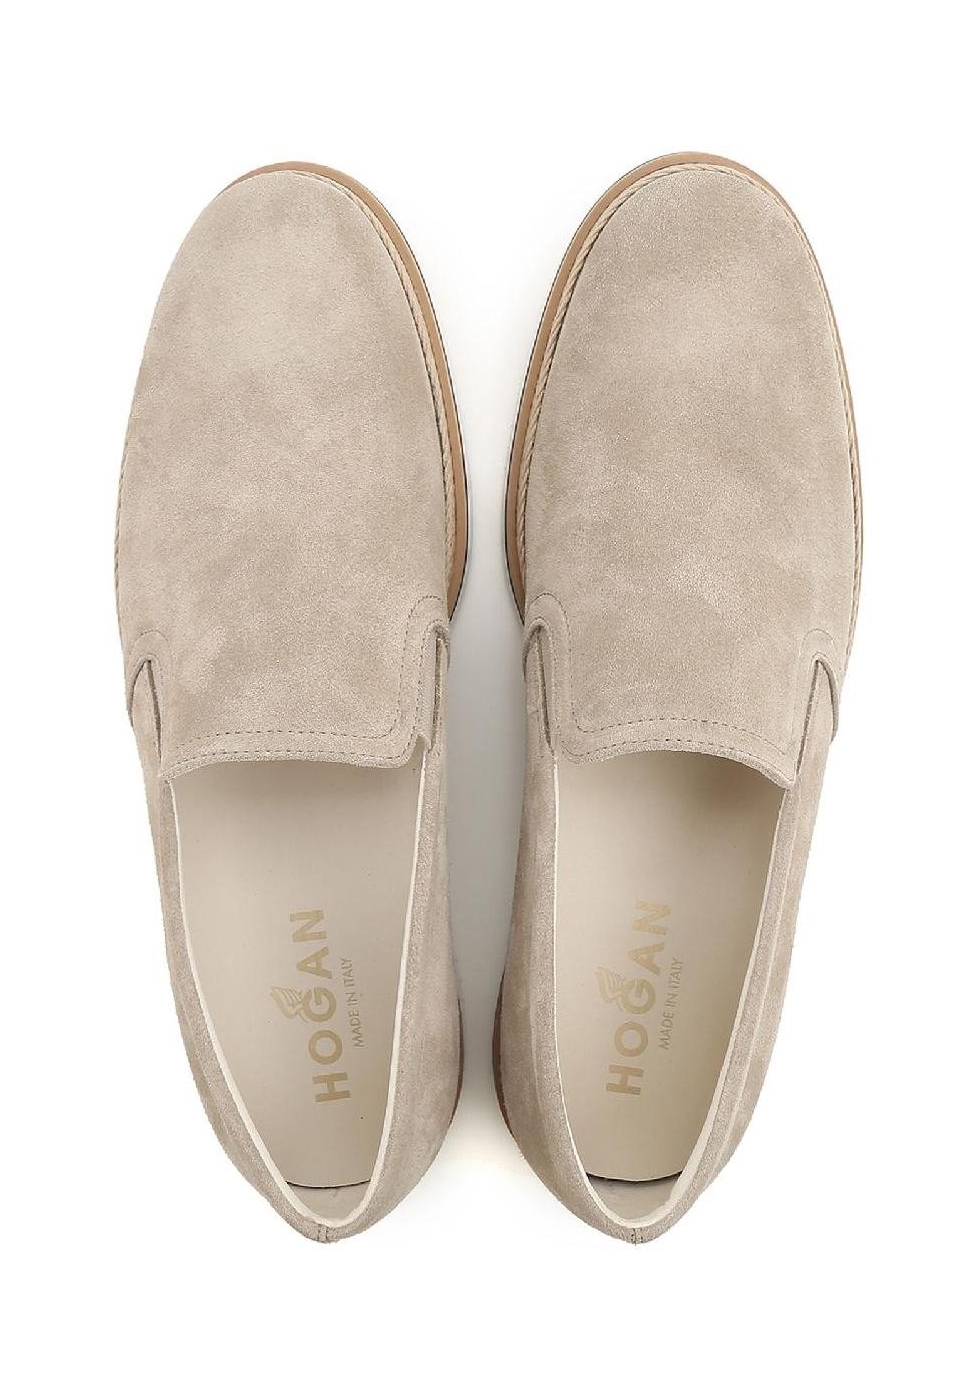 slip-ons loafers shoes in beige suede 